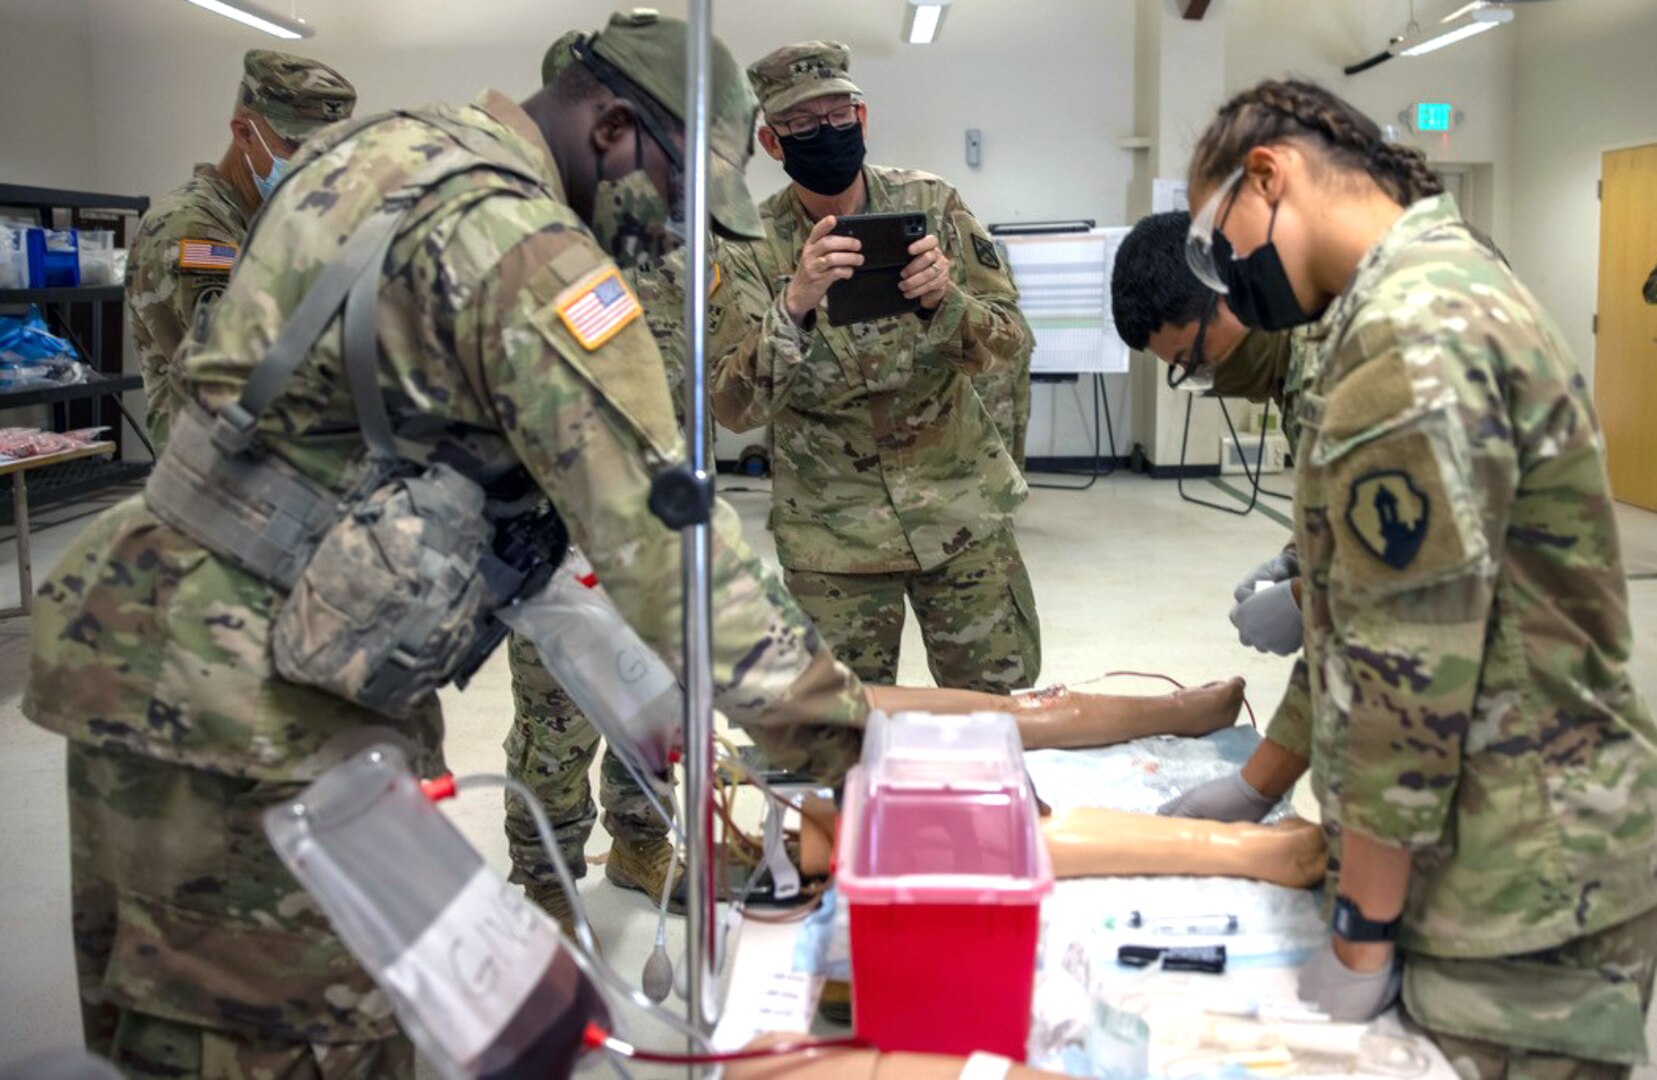 Lt. Gen. Theodore Martin (center), commander of the U.S. Army Combined Arms Center, or CAC, takes a photo of 68W Combat Medic’s training during a culminating Field Training Exercise at the Soldier Medic Training Site, Medical Education and Training Campus, Joint Base San Antonio-Camp Bullis, Sept. 10.